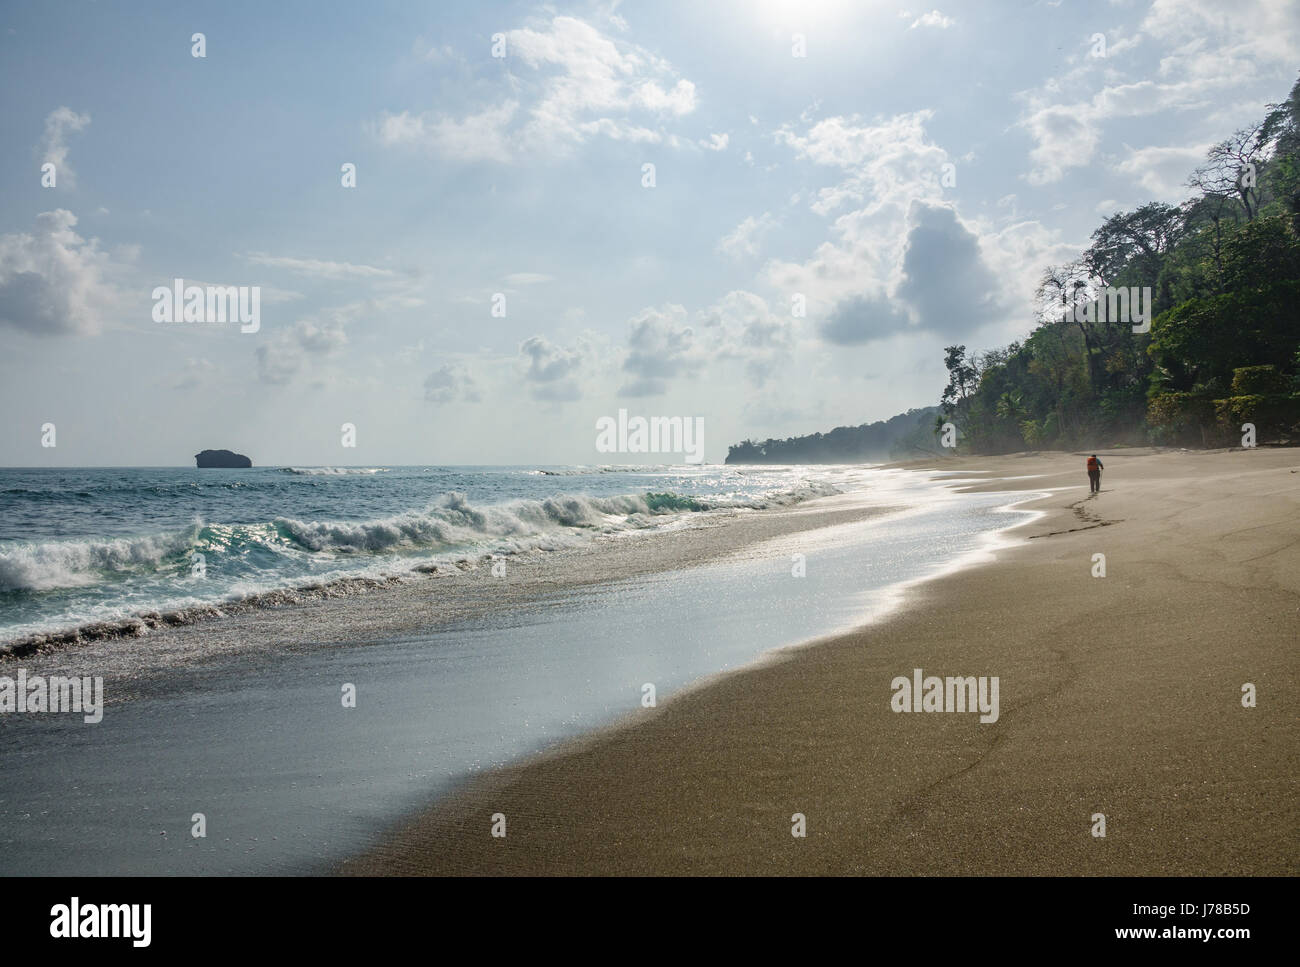 Corcovado National Park - beach view with tourist walking Stock Photo